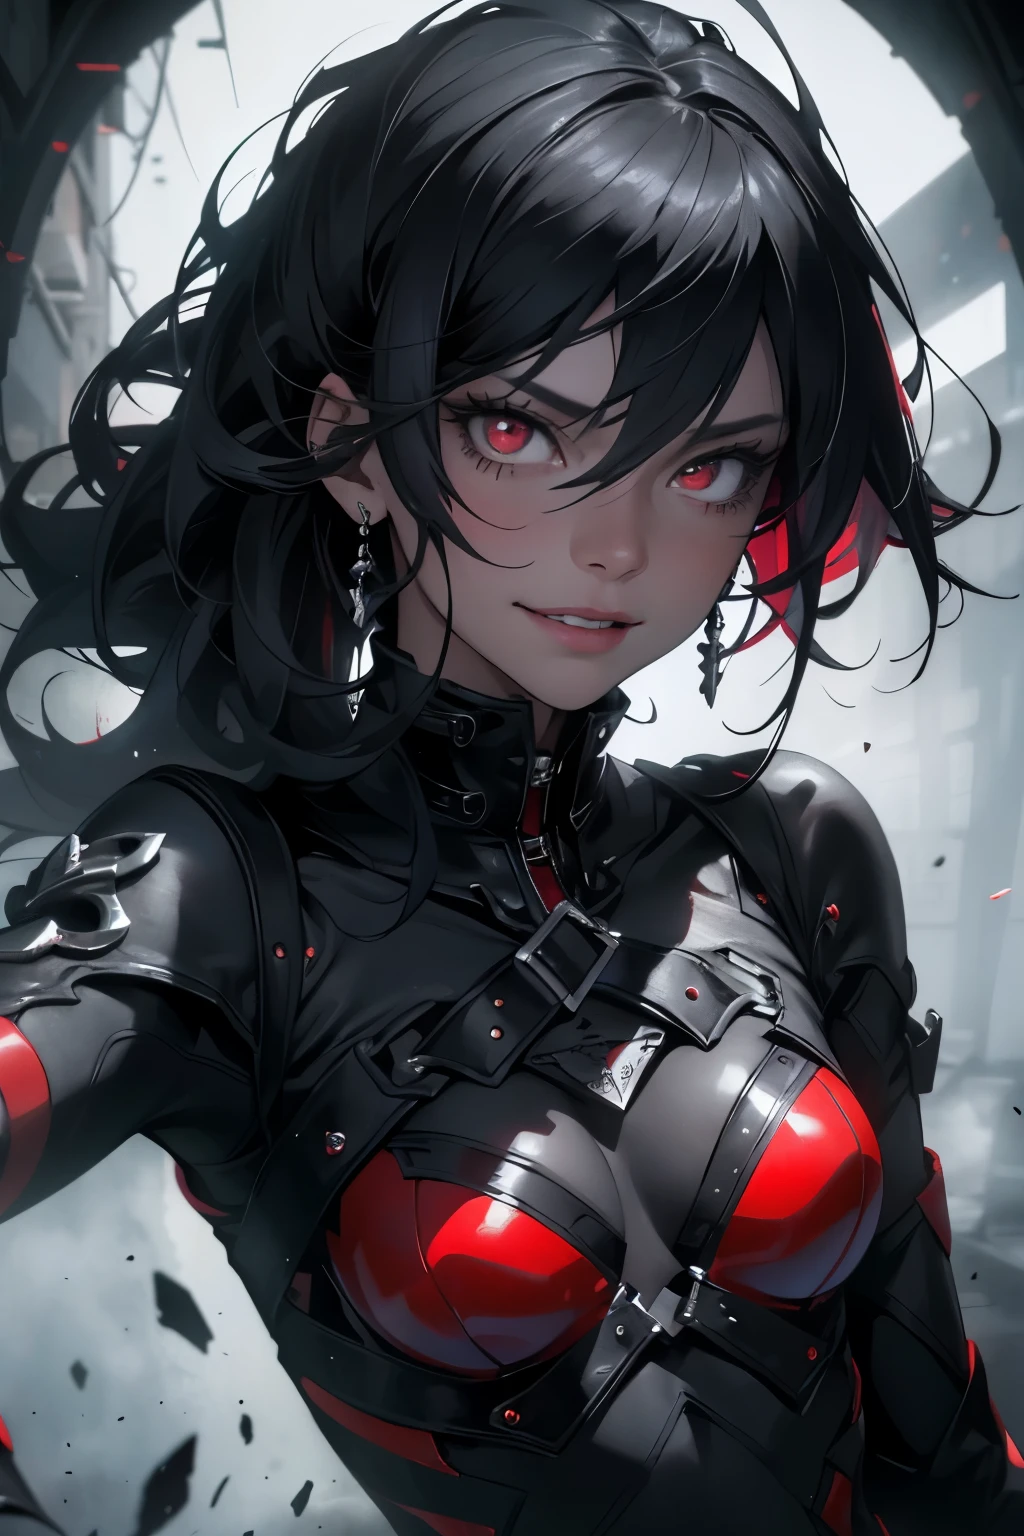 Award-winning portrait of a girl with a fusion of grimreaper and smiling expression, her short curly black hair framing her perfectly red eyes that gleam with an otherworldly glow. The background is set in a noir mood with shadows casting long, dramatic lines, adding to the mysterious allure of the girl. Her fangs, sharp and menacing, are visible, dripping with blood, giving an air of danger and intrigue. The photo is taken at a random angle, capturing every detail of her exquisite features in high resolution, making it a masterpiece of surreal, high-definition art. The artwork quality is best described as detailed and realistic, with a captivating play of light and